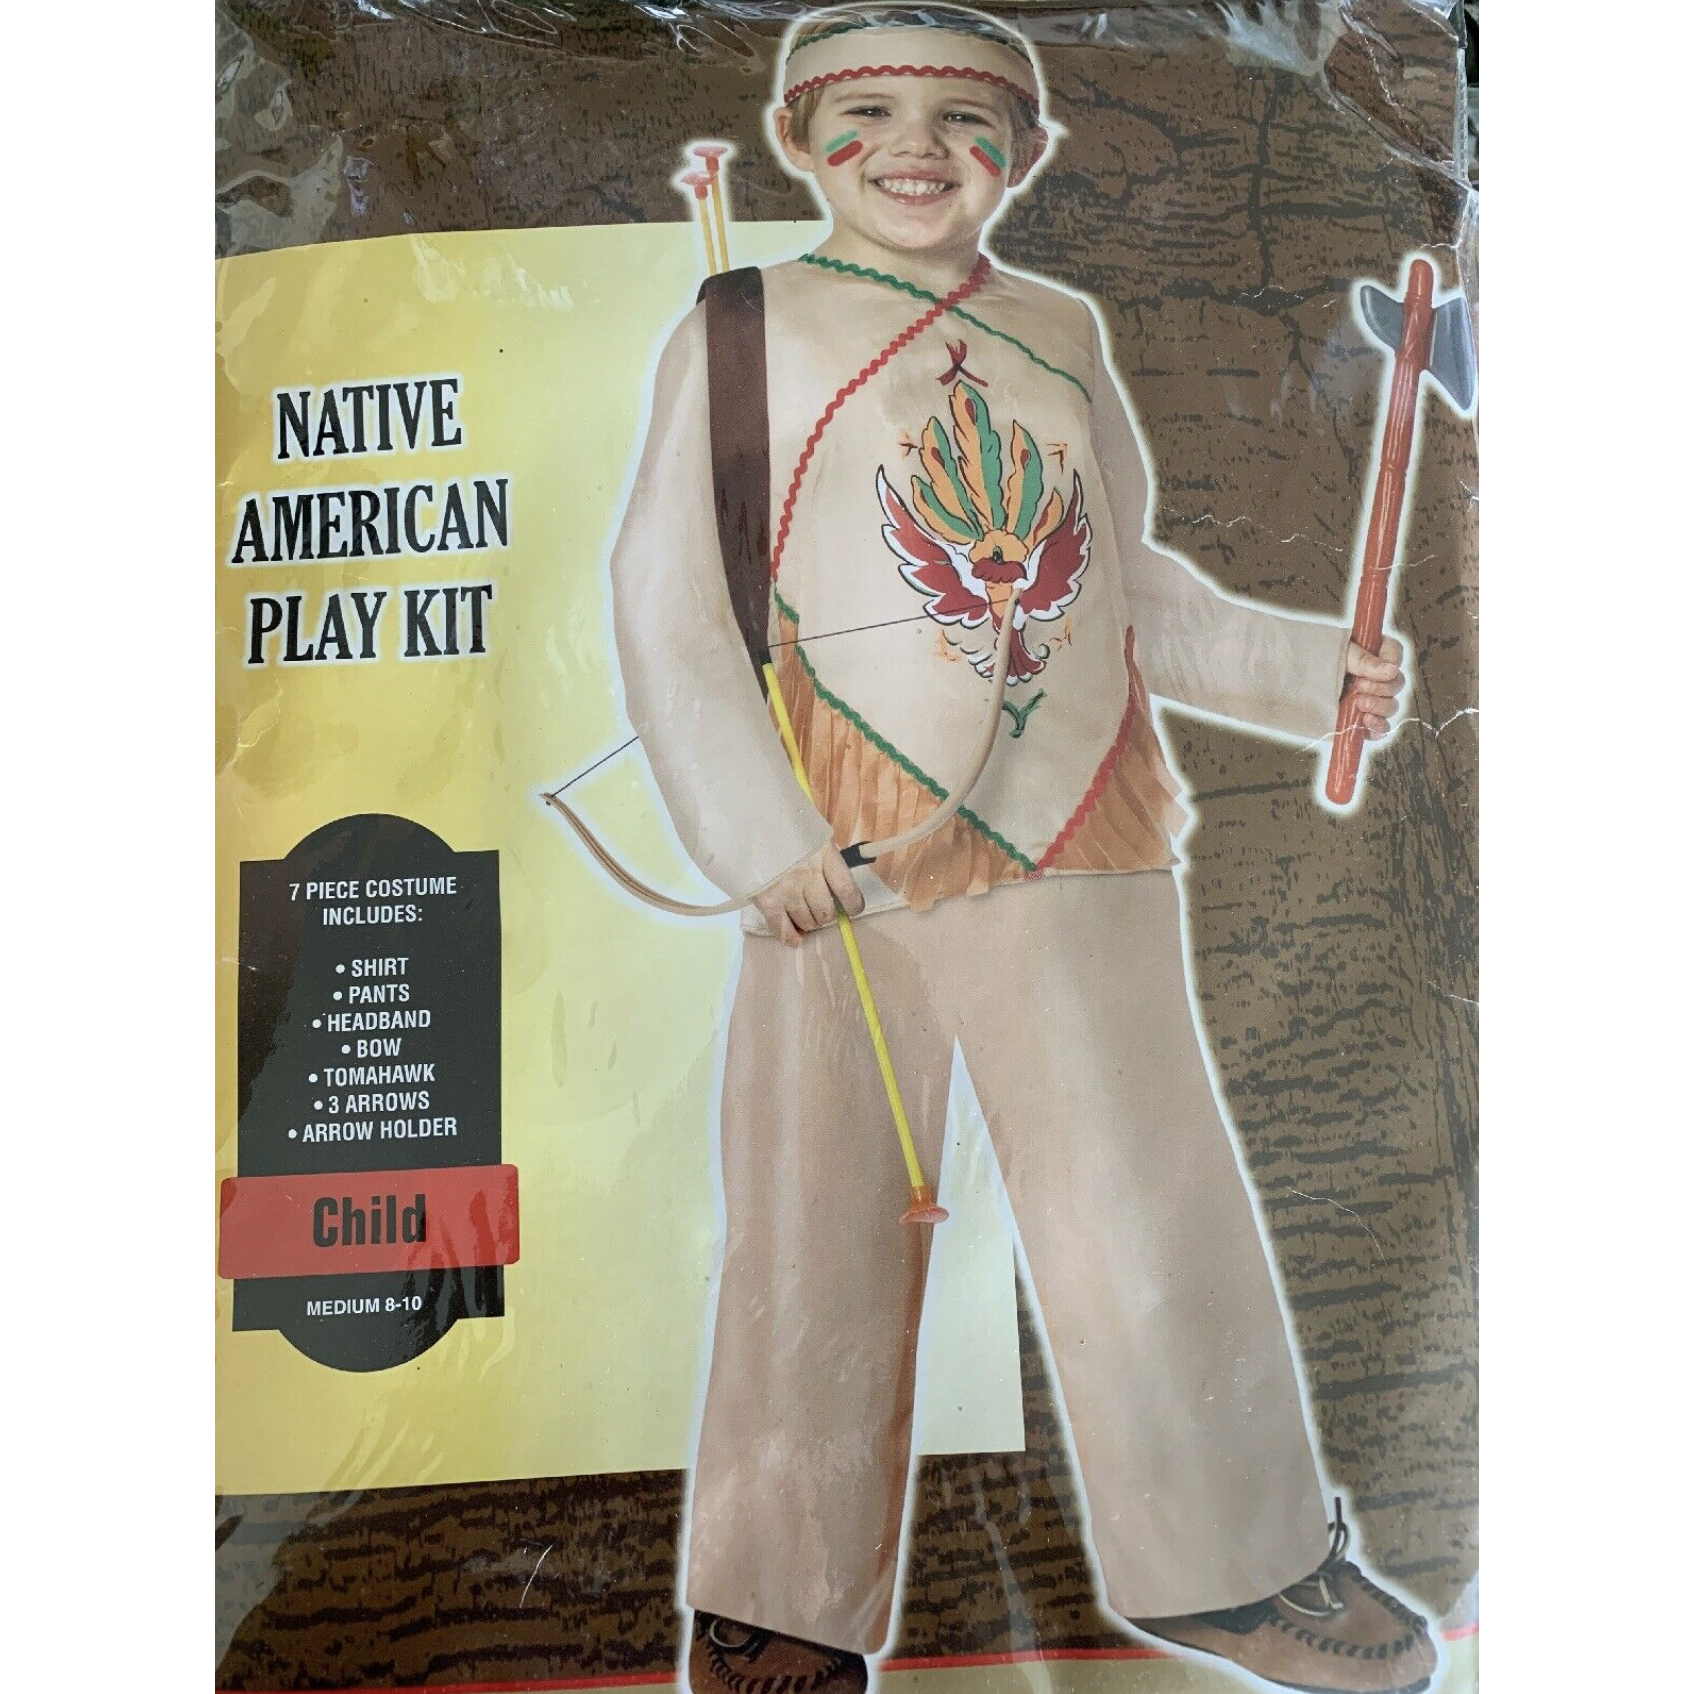 Ultimate Party Super Store COSTUMES Med (8-10) Native American Child's Play Kit